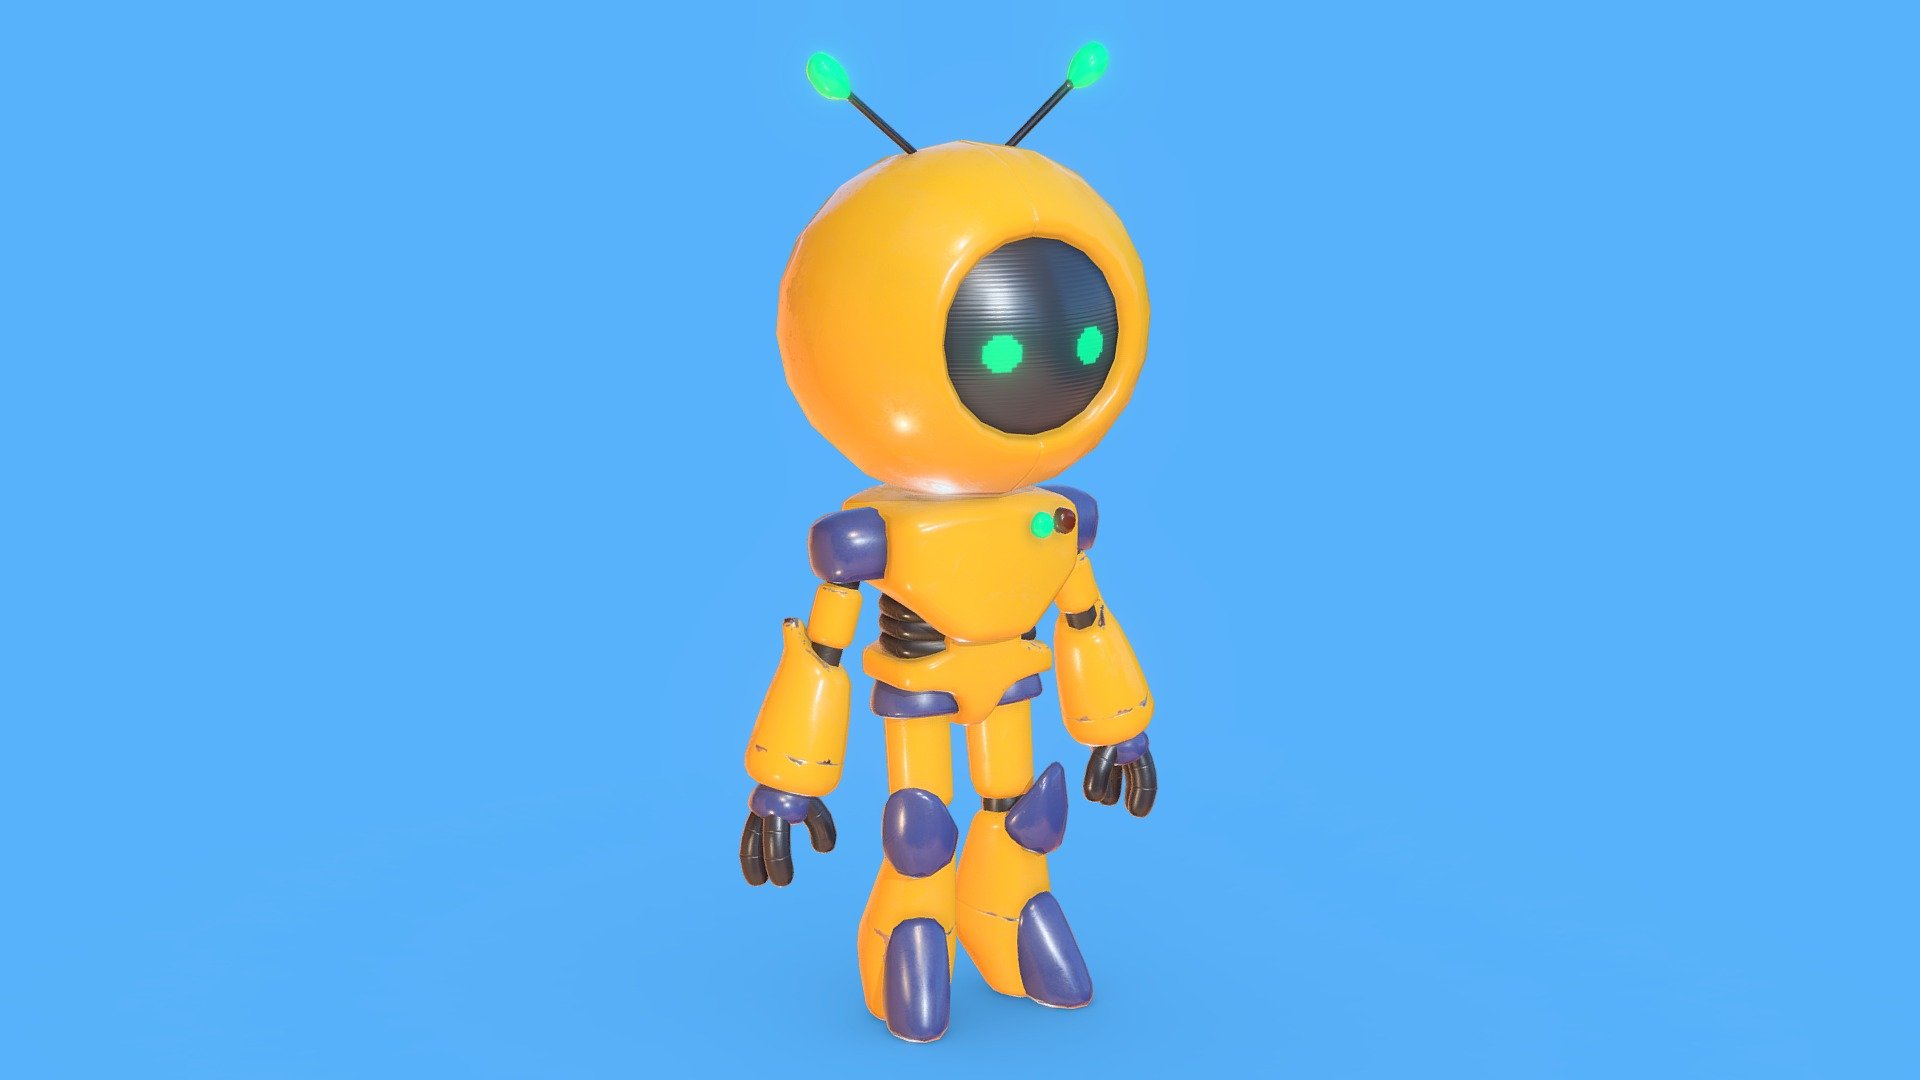 I got to texture a little robot friend with the help from some human friends!

Concept art from Alex Brown

3D Model &amp; UVing from Megan McCurdy - Friendly Robot - 3D model by maddhattpatt (@maddhatt) 3d model